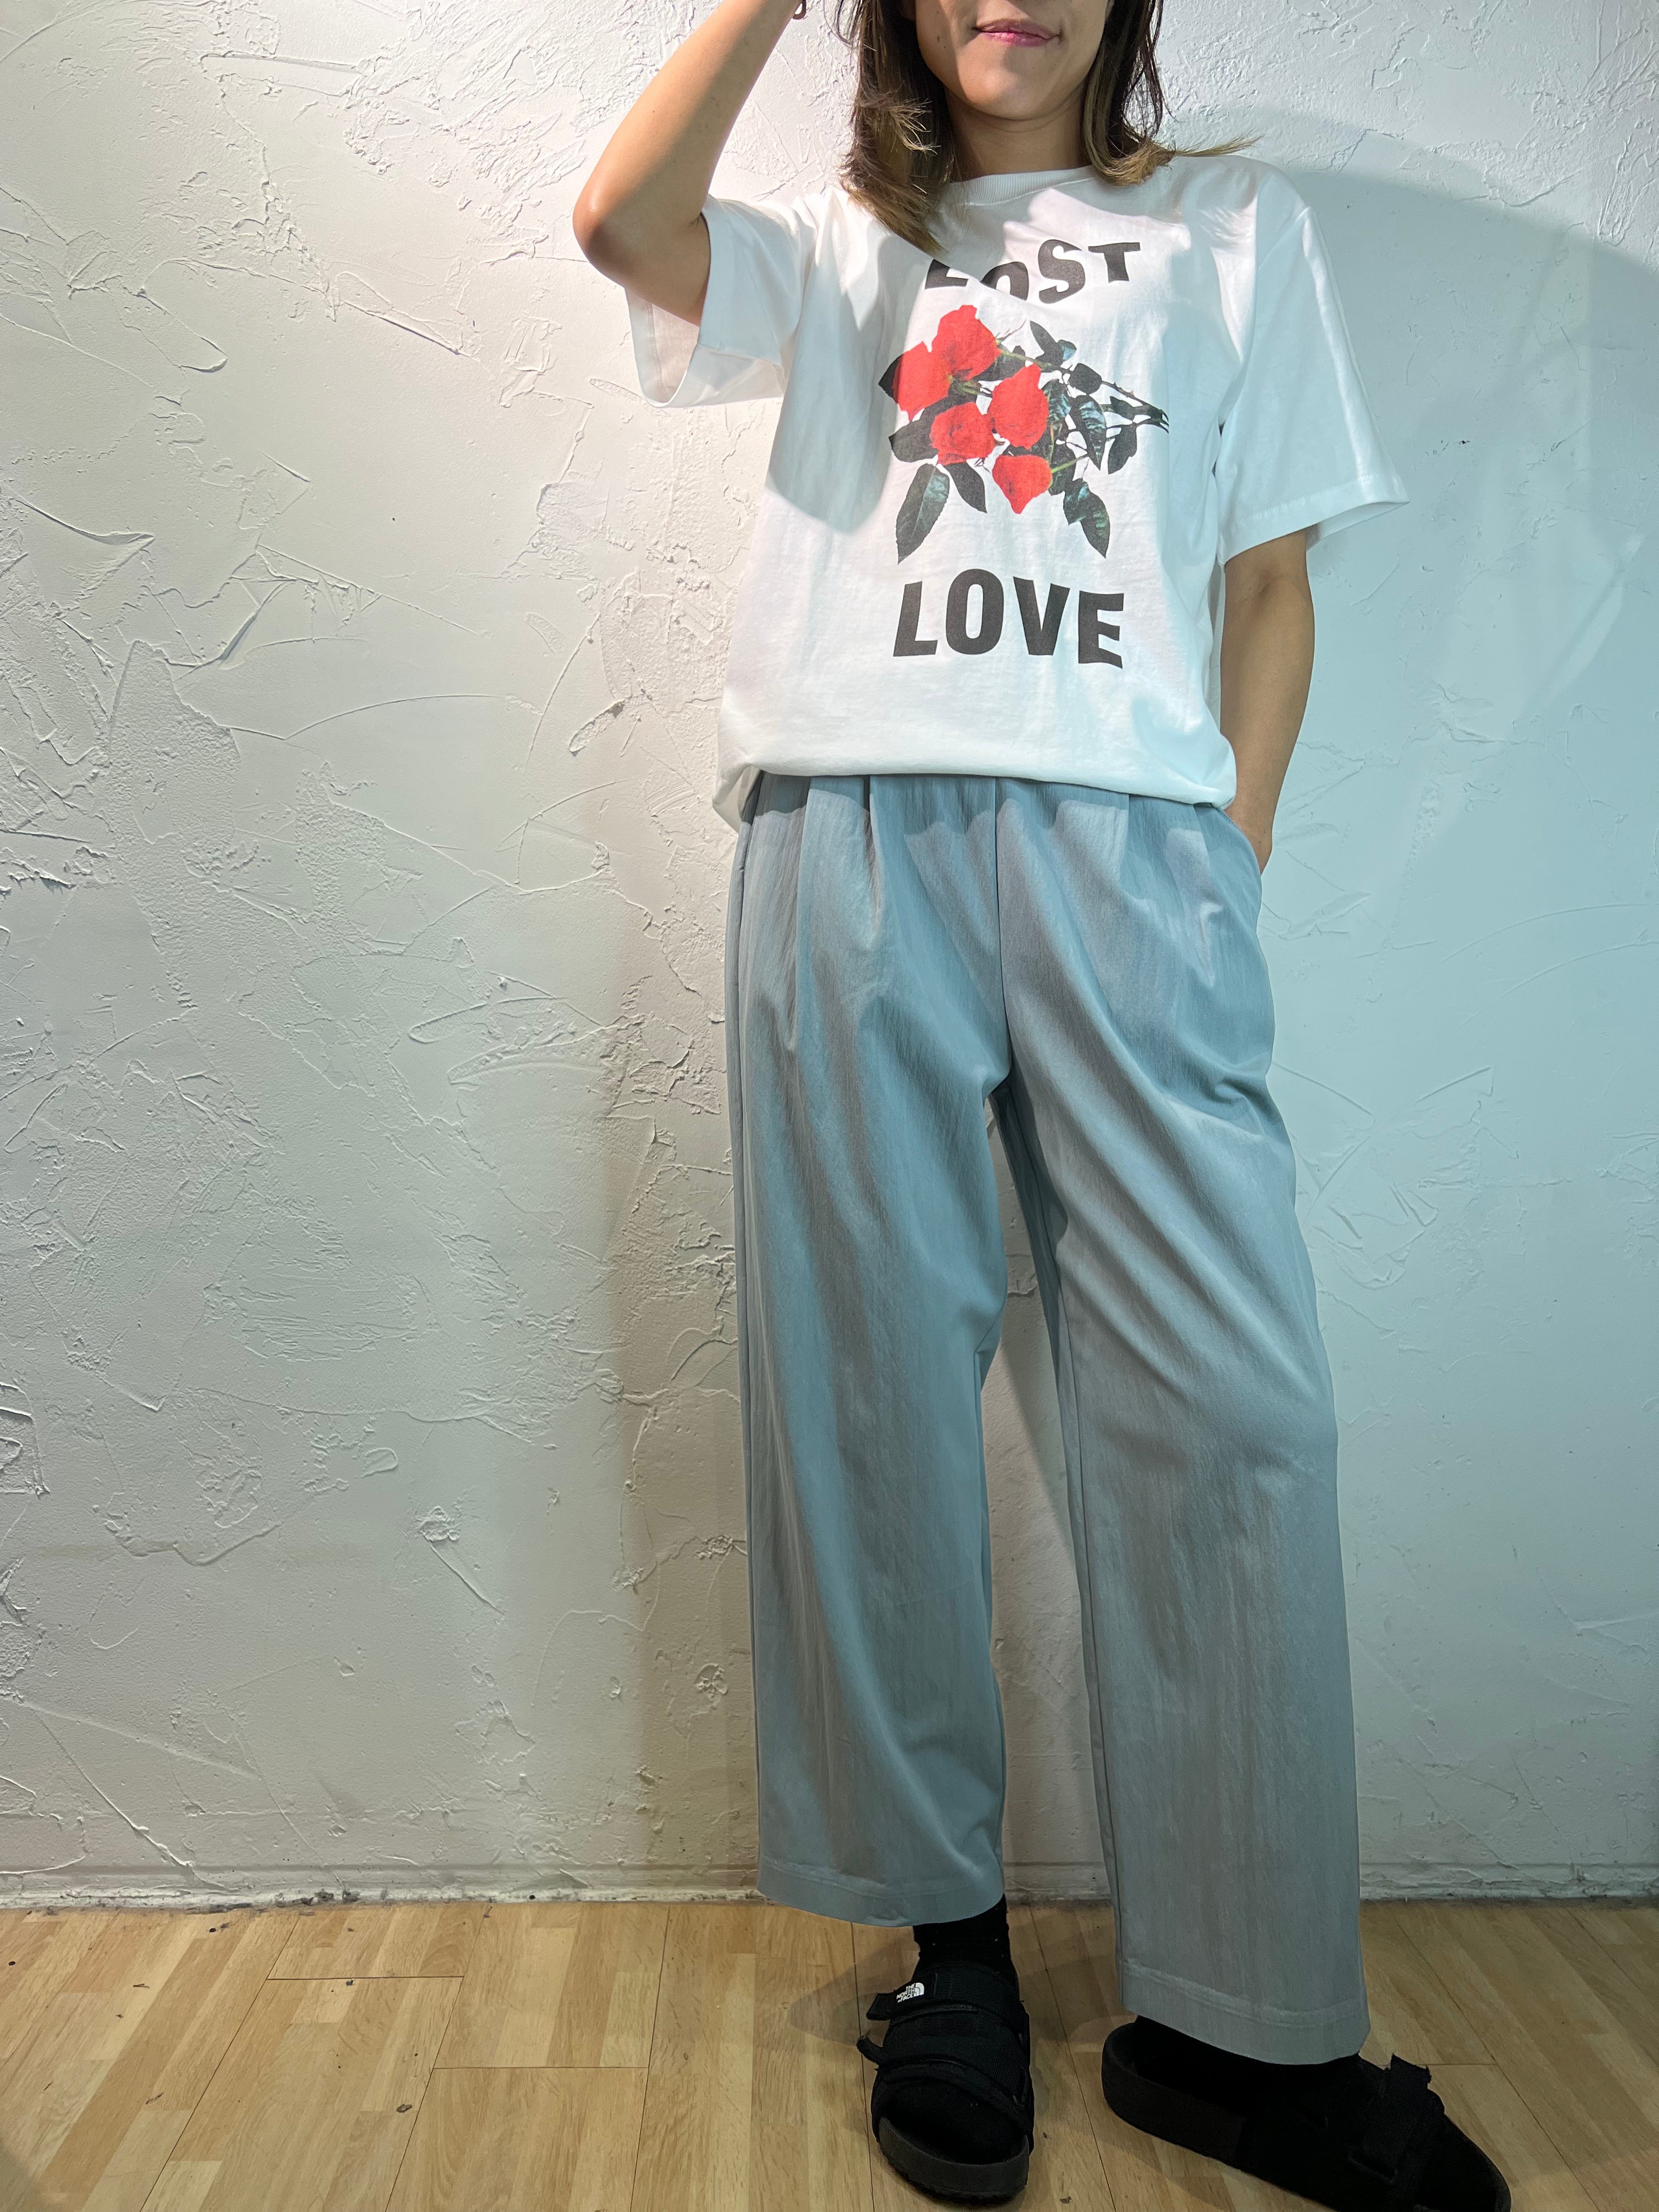 Flowers "Lost Love" T-shirt